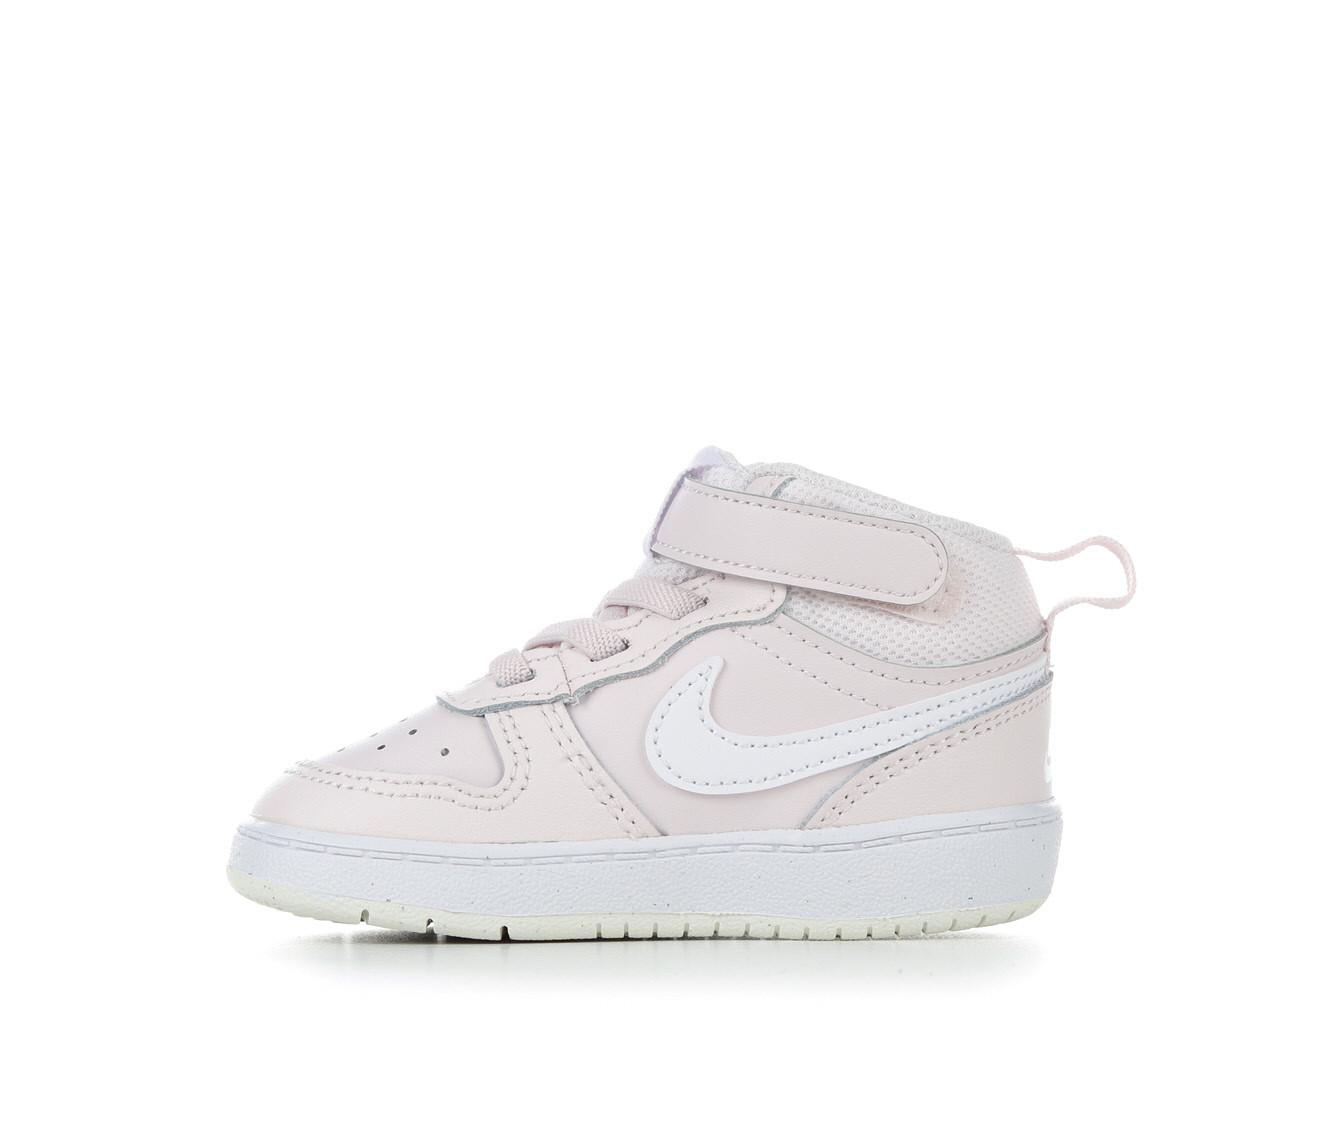 Girls' Nike Infant & Toddler Court Borough Mid 2 Sneakers